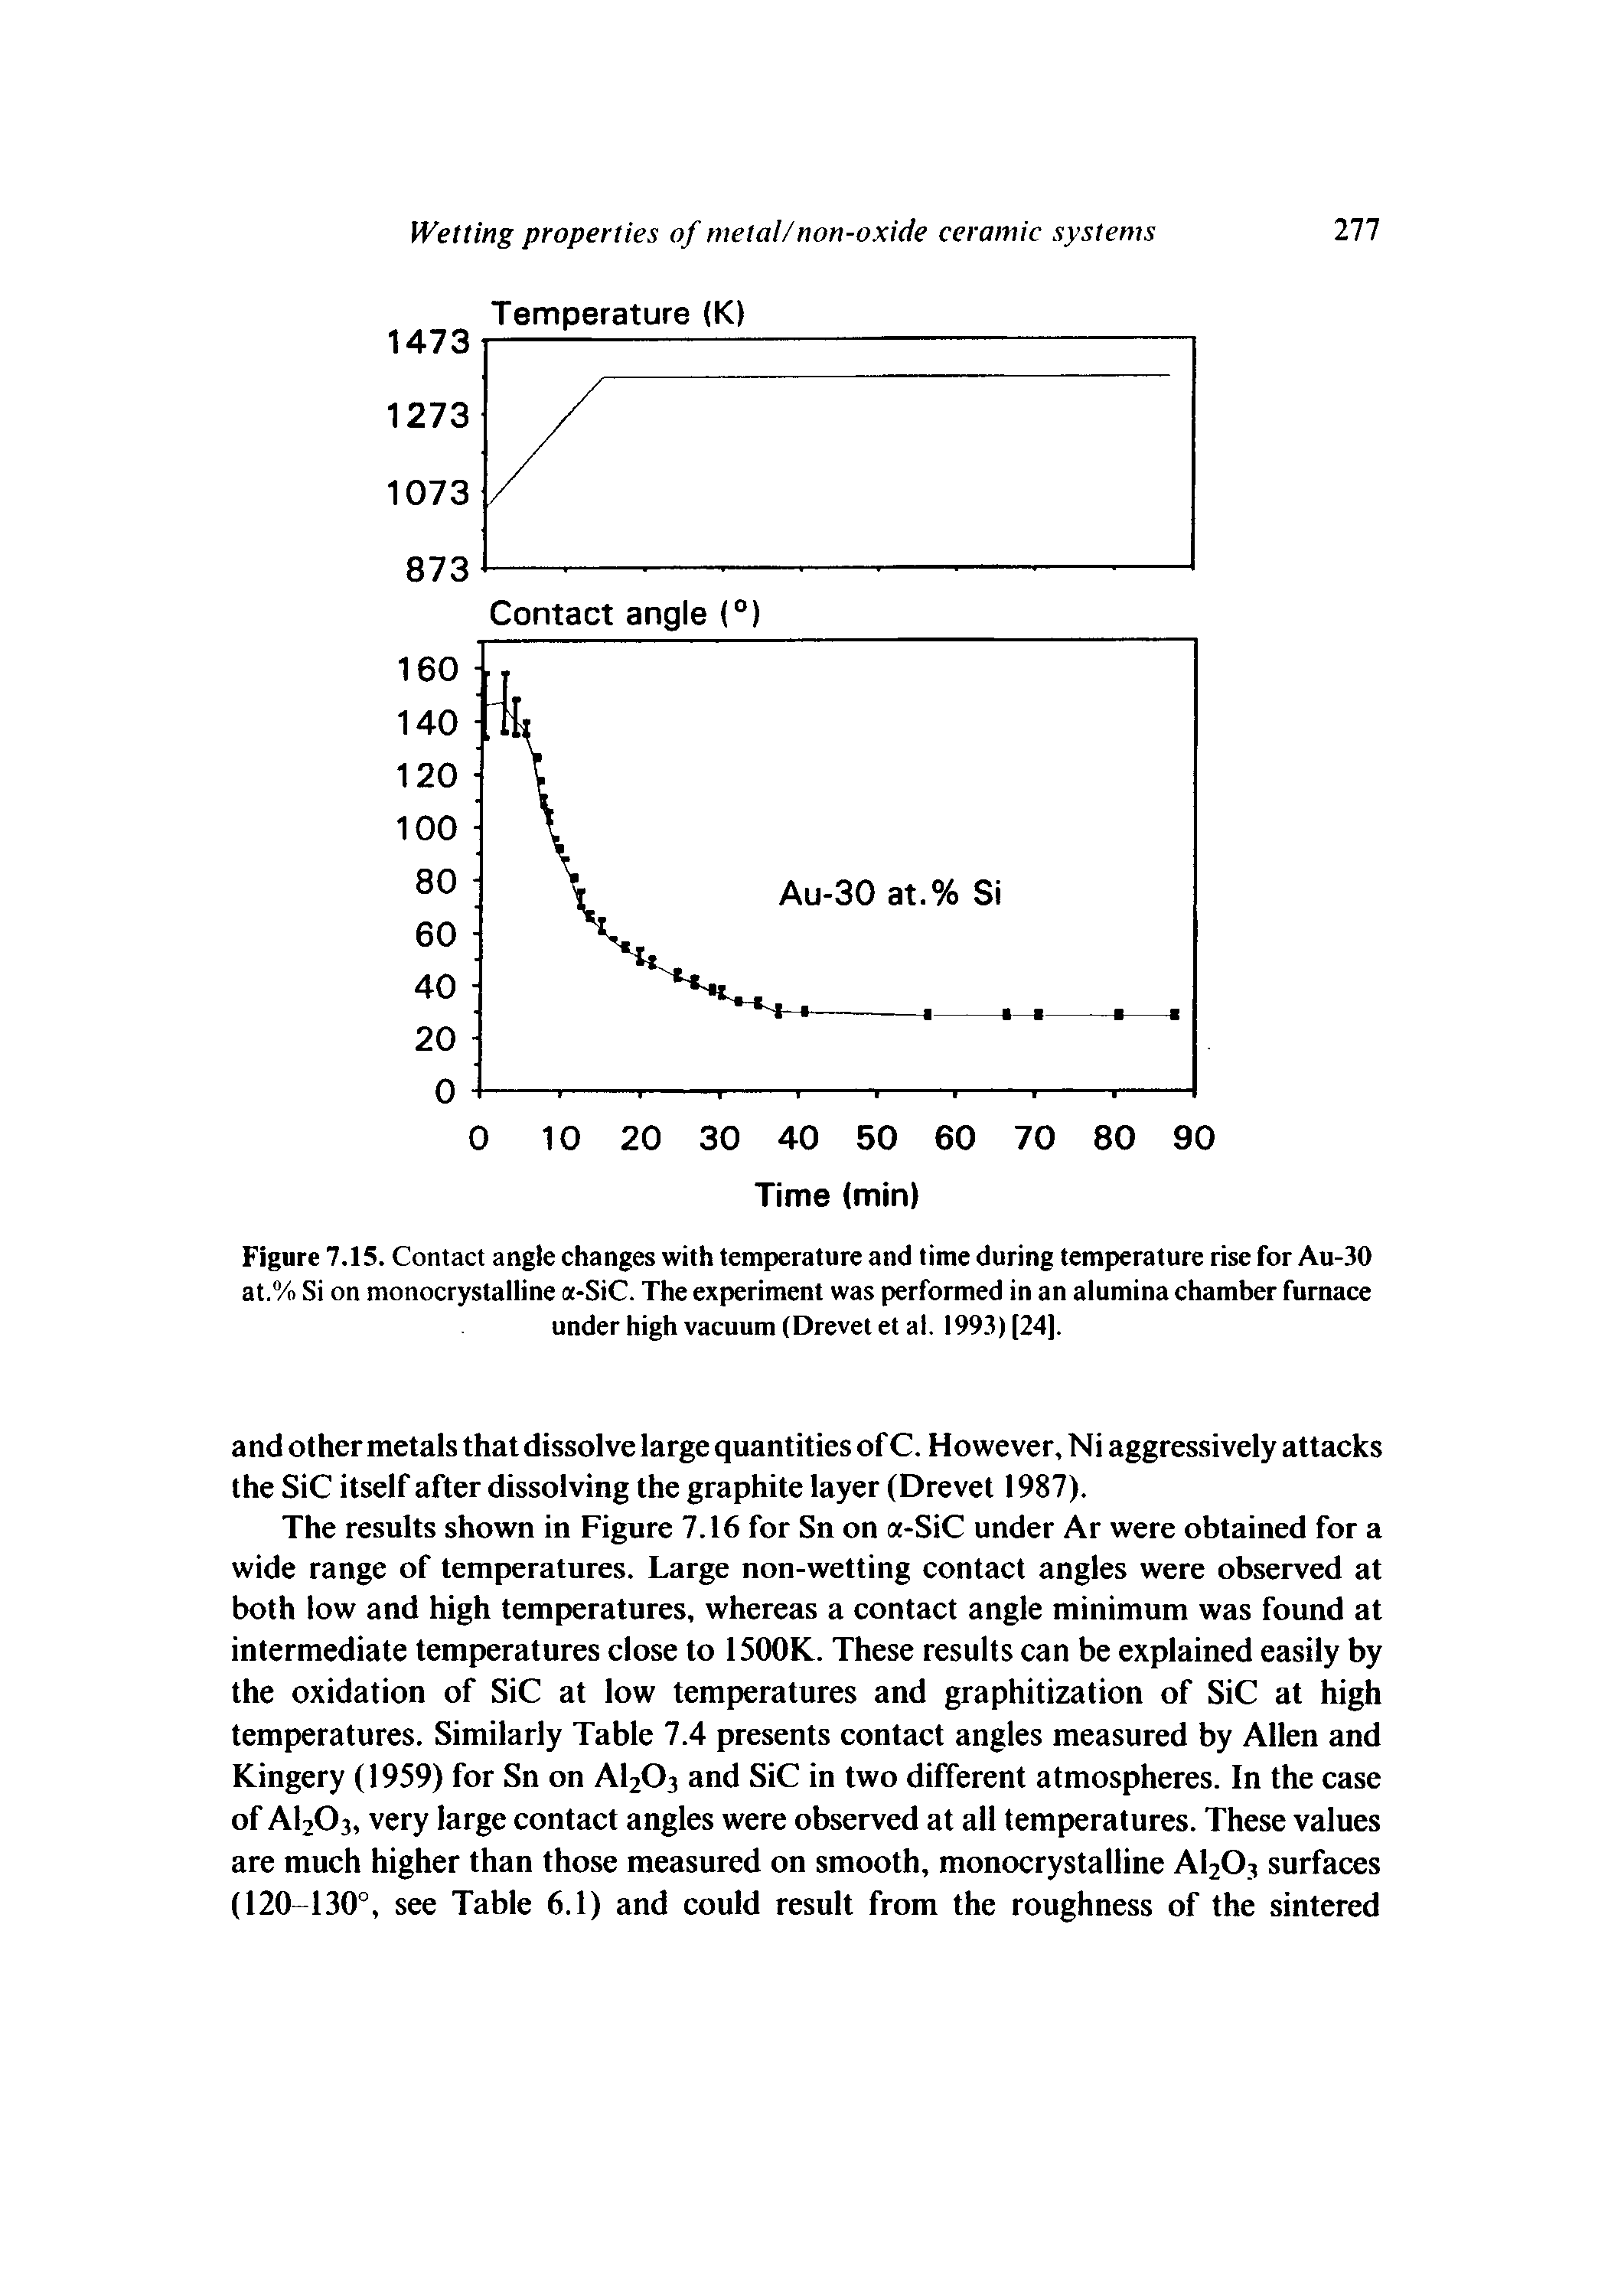 Figure 7.15. Contact angle changes with temperature and time during temperature rise for Au-30 at.% Si on monocrystalline a-SiC. The experiment was performed in an alumina chamber furnace under high vacuum (Drevet et al. 1993) [24].